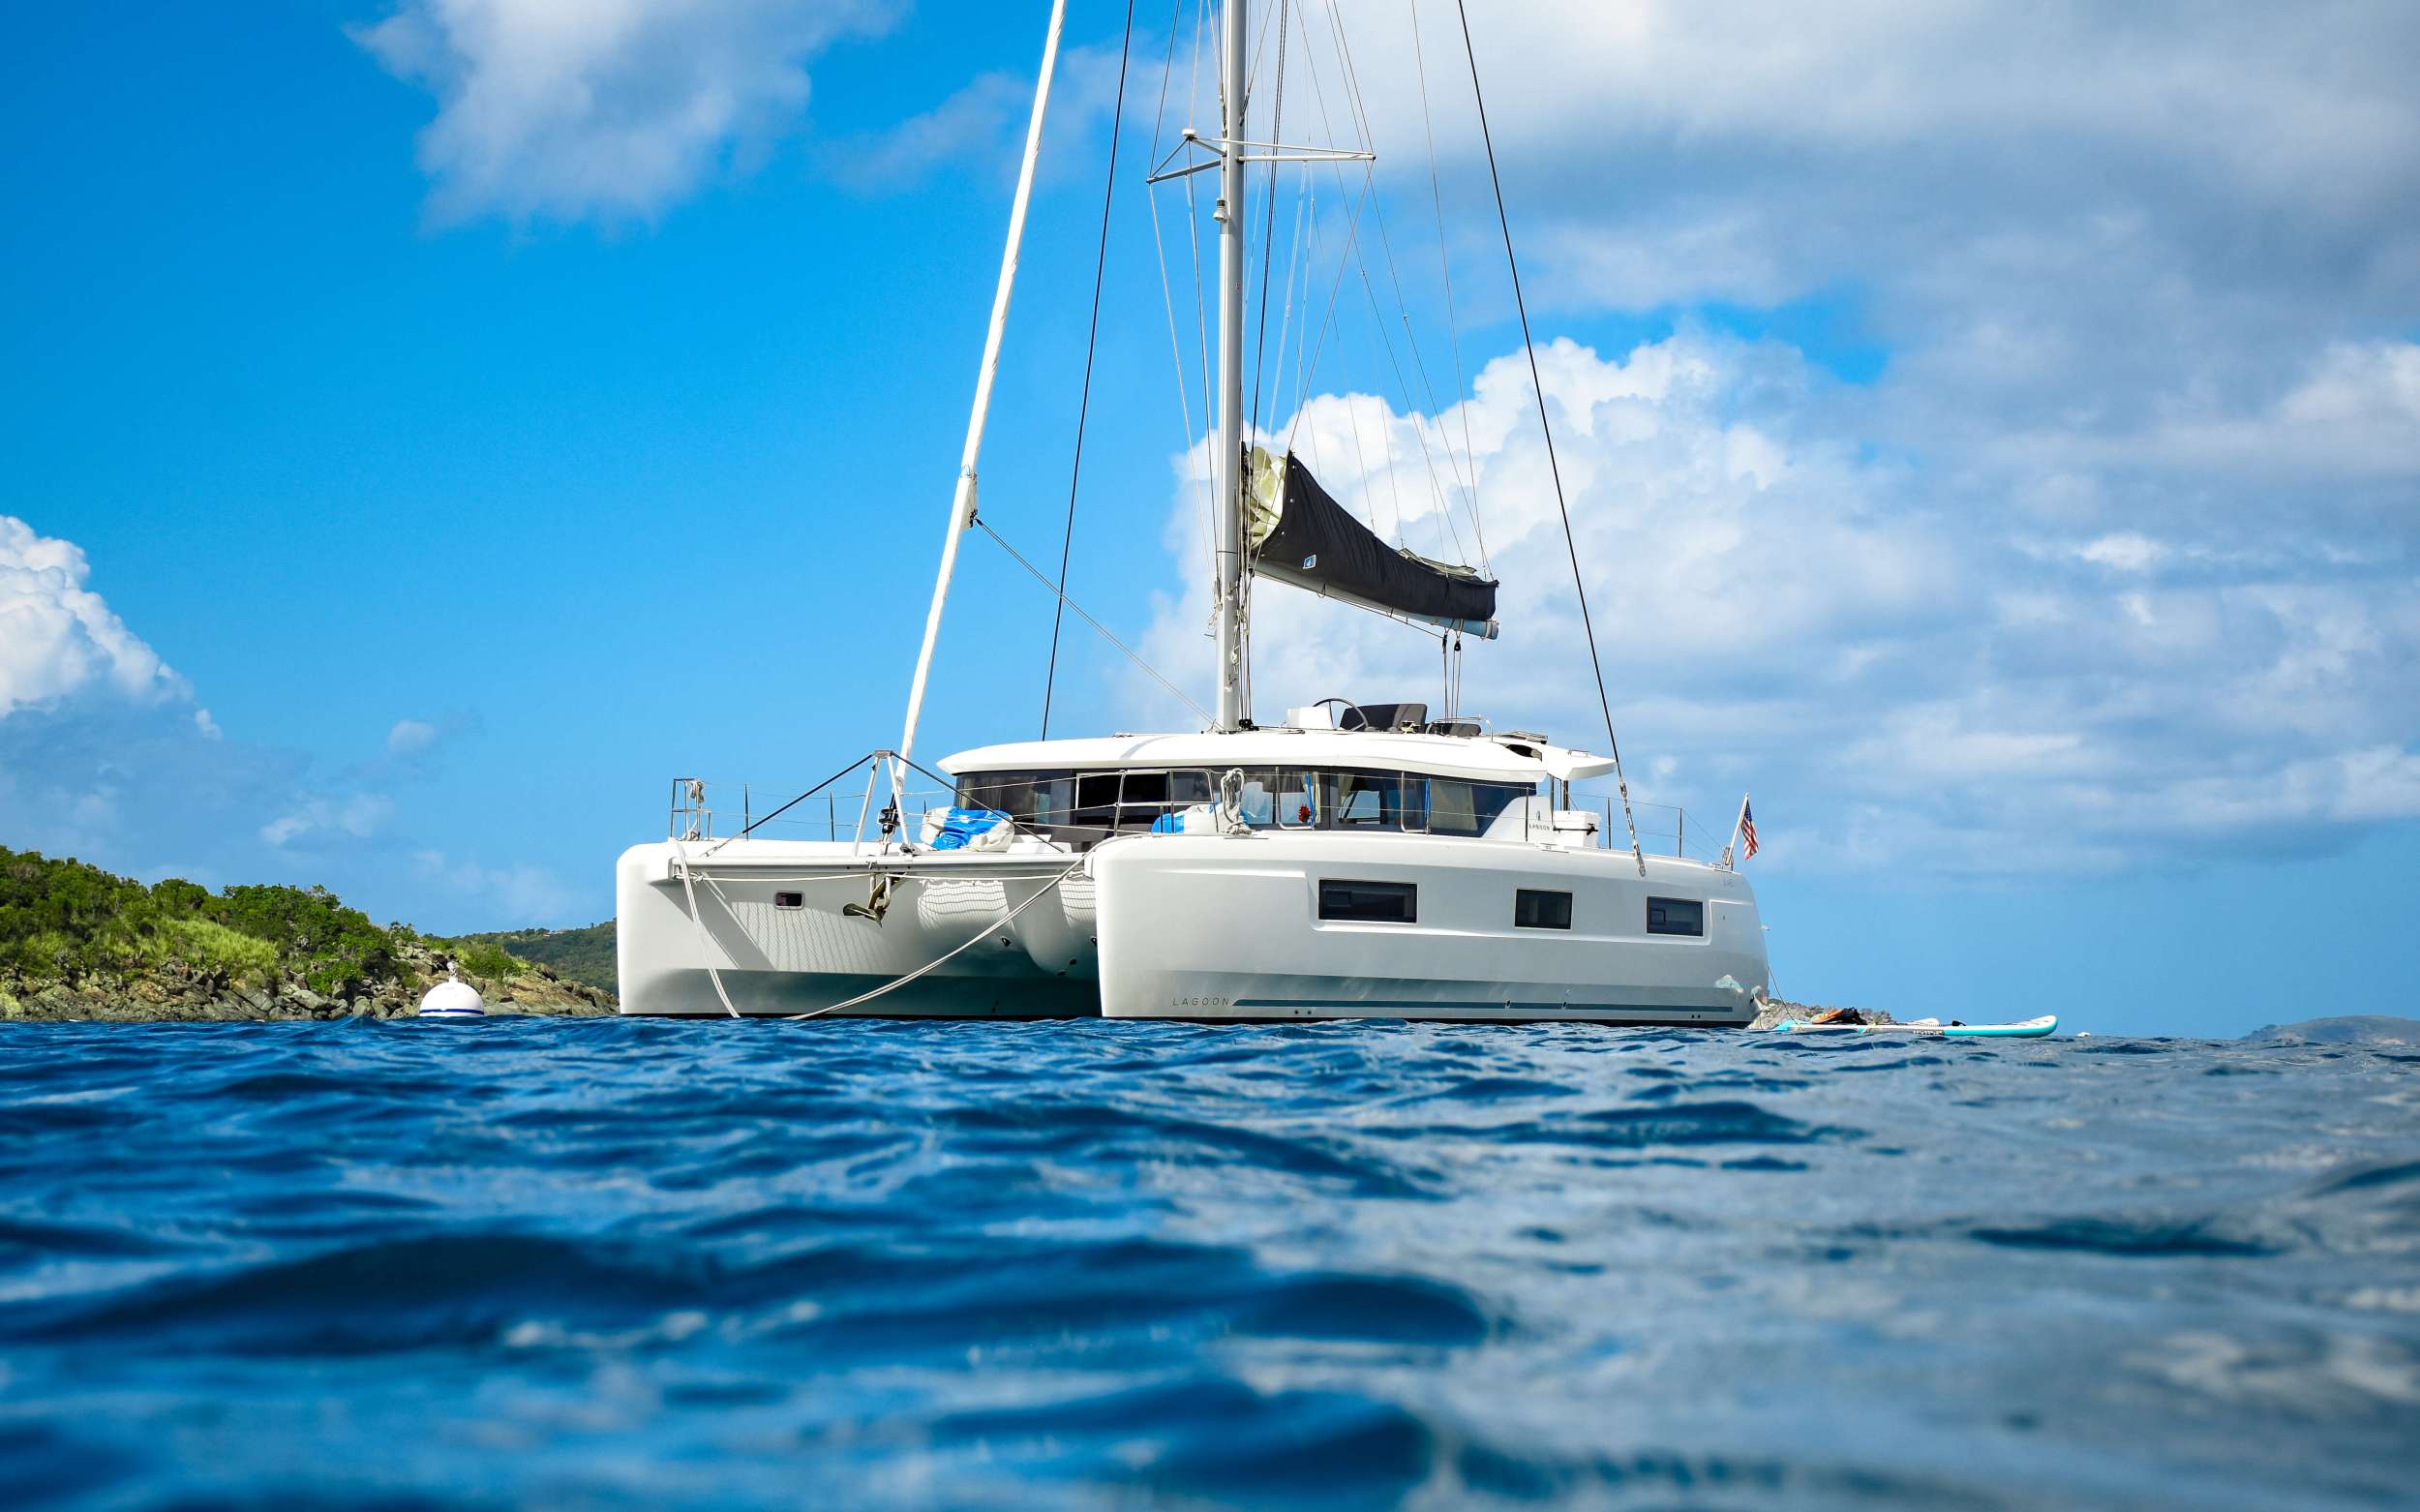 CELAVIE - Yacht Charter East End Bay & Boat hire in Caribbean 2